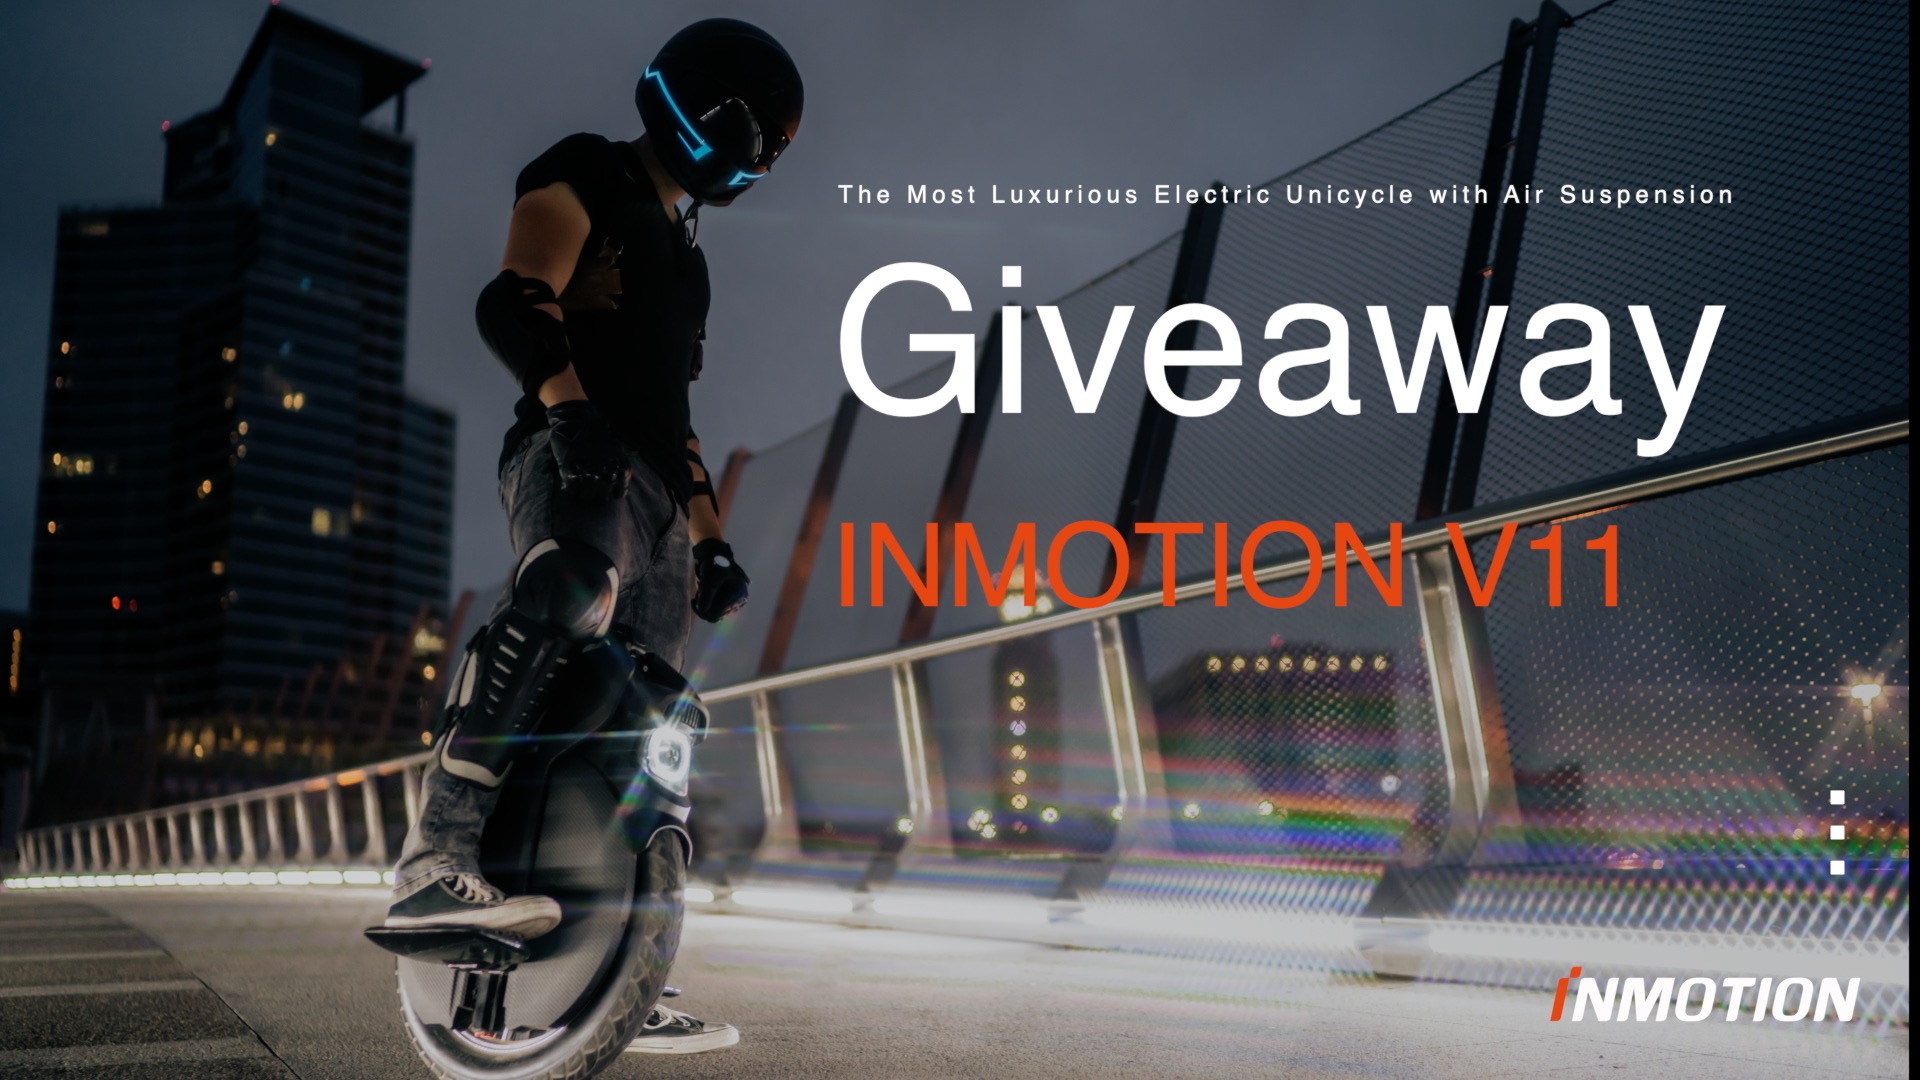 INMOTION V11 Electric Unicycle Giveaway